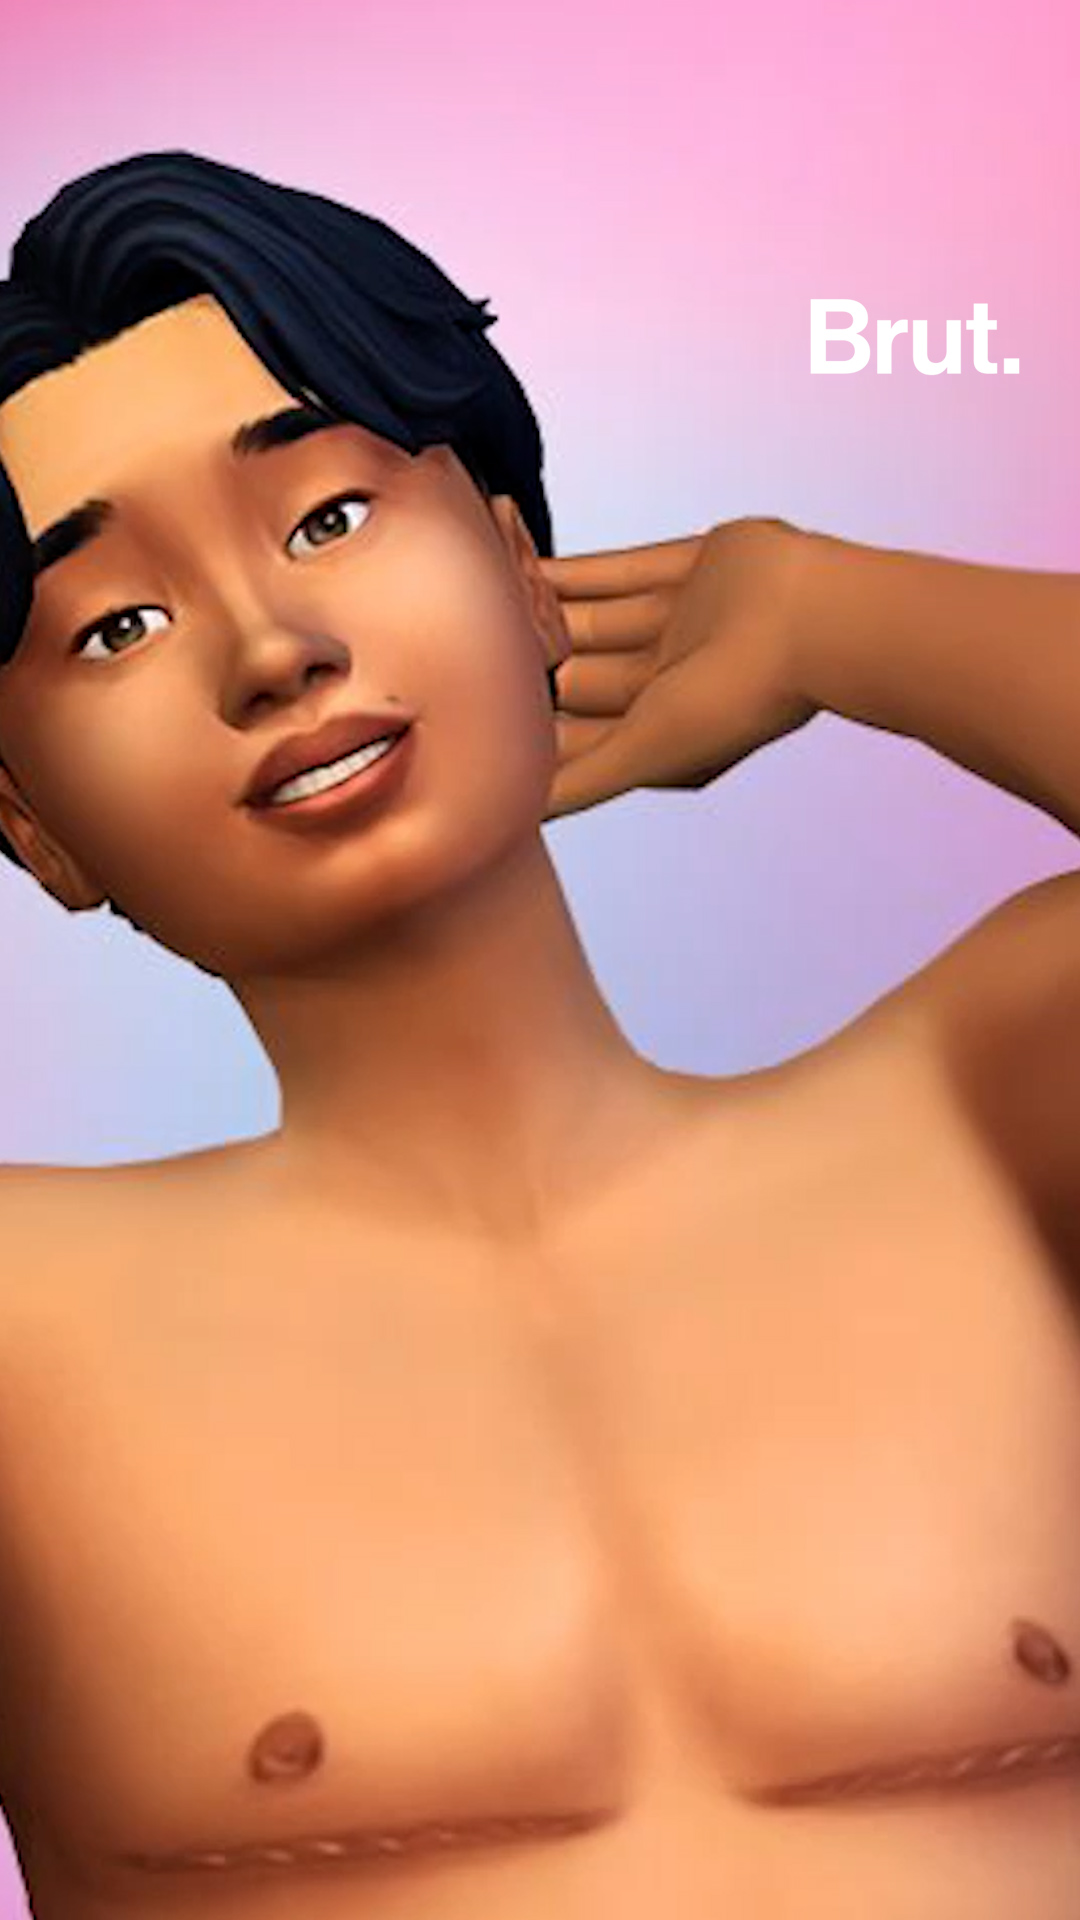 brian ridgway add sims 4 get naked photo